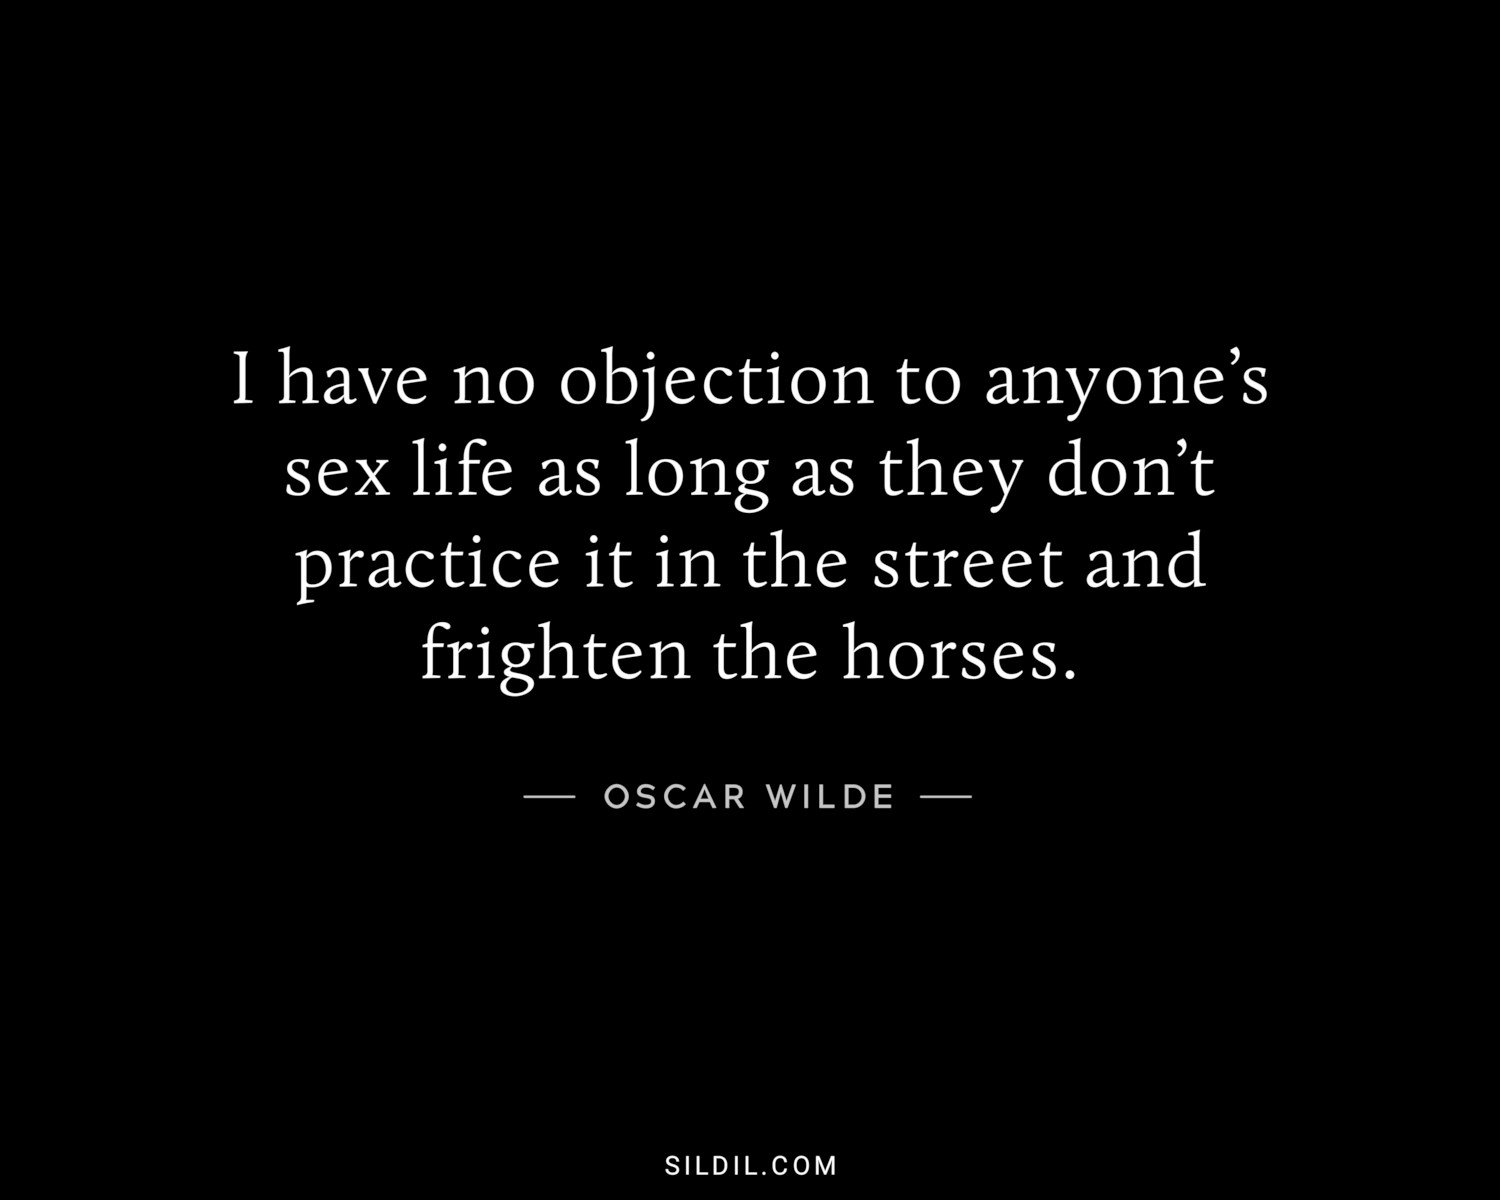 I have no objection to anyone’s sex life as long as they don’t practice it in the street and frighten the horses.